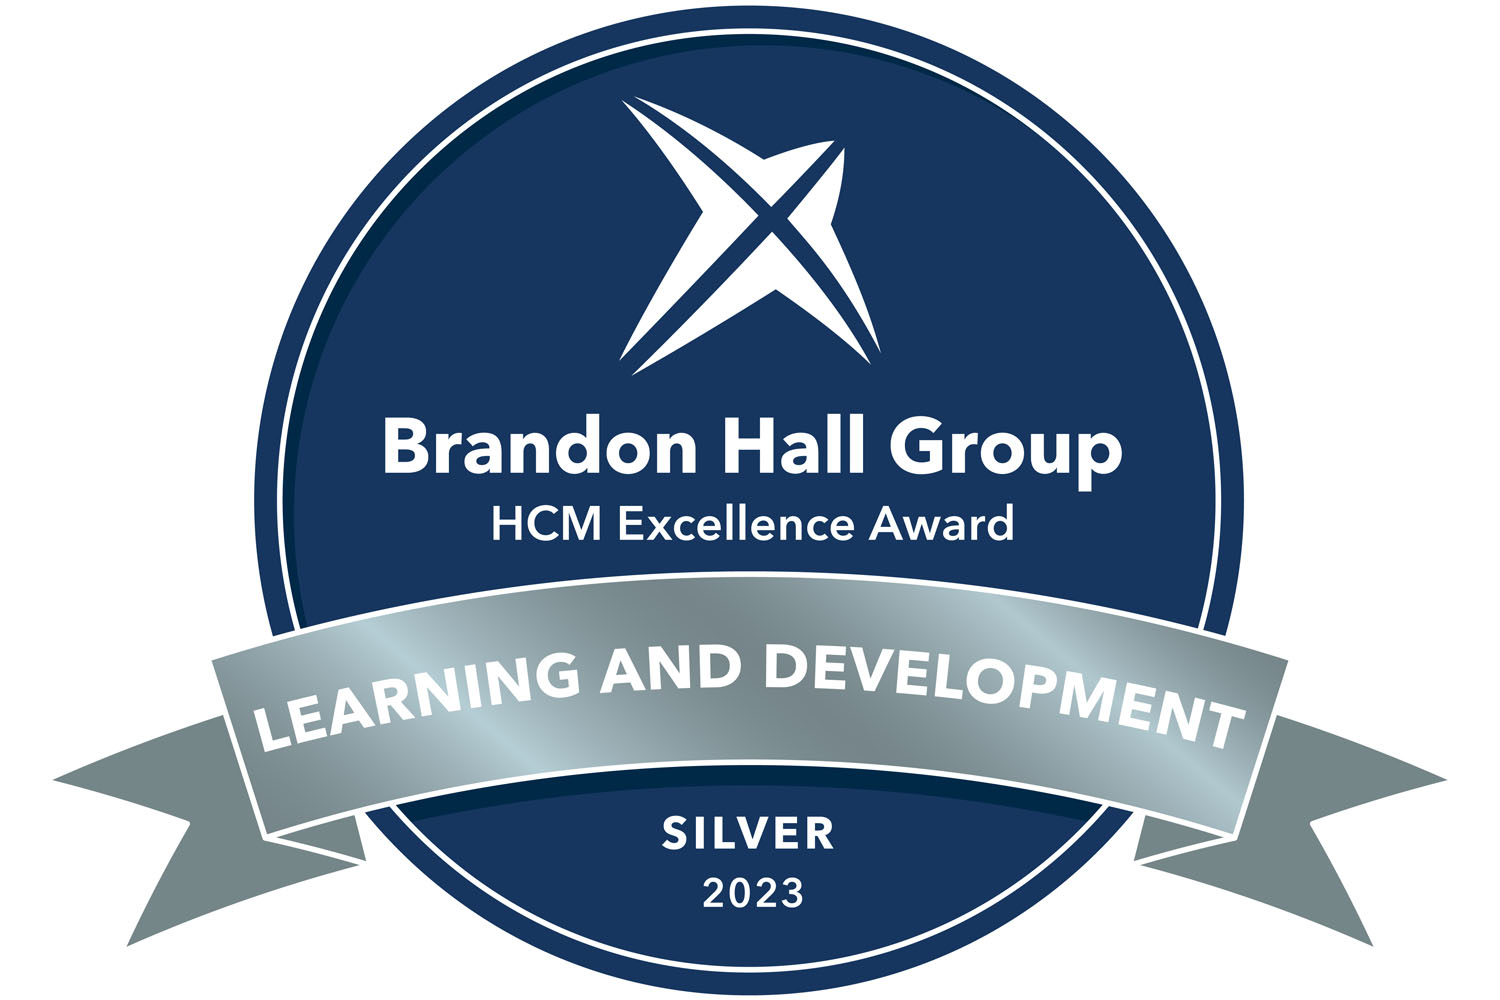 Brandon Hall Awards 2023 - Learning and Development Silver